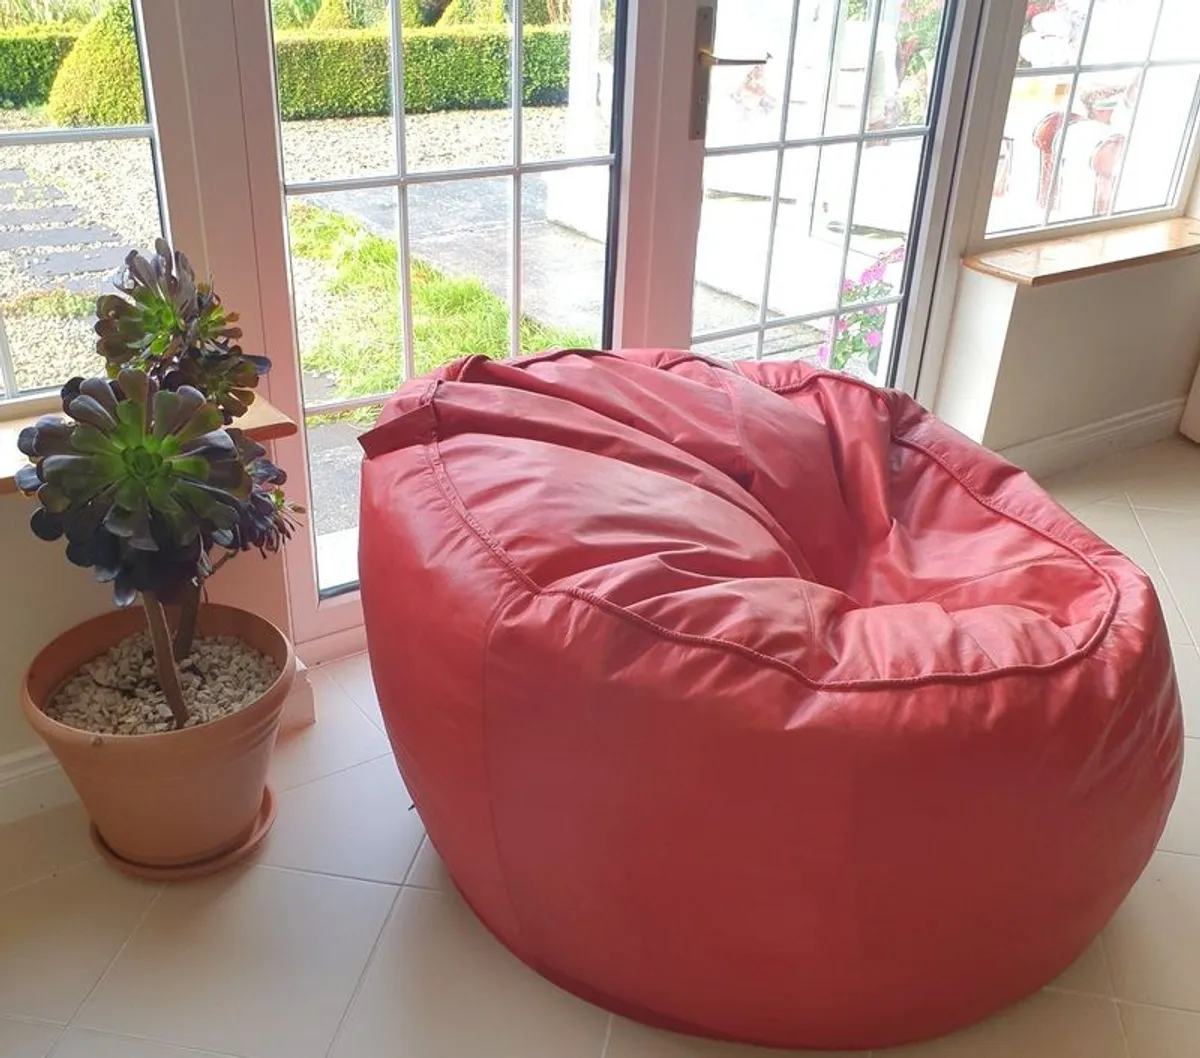 A Really Rare Fantastic Red Real Leather Giant Beanbag - Image 1